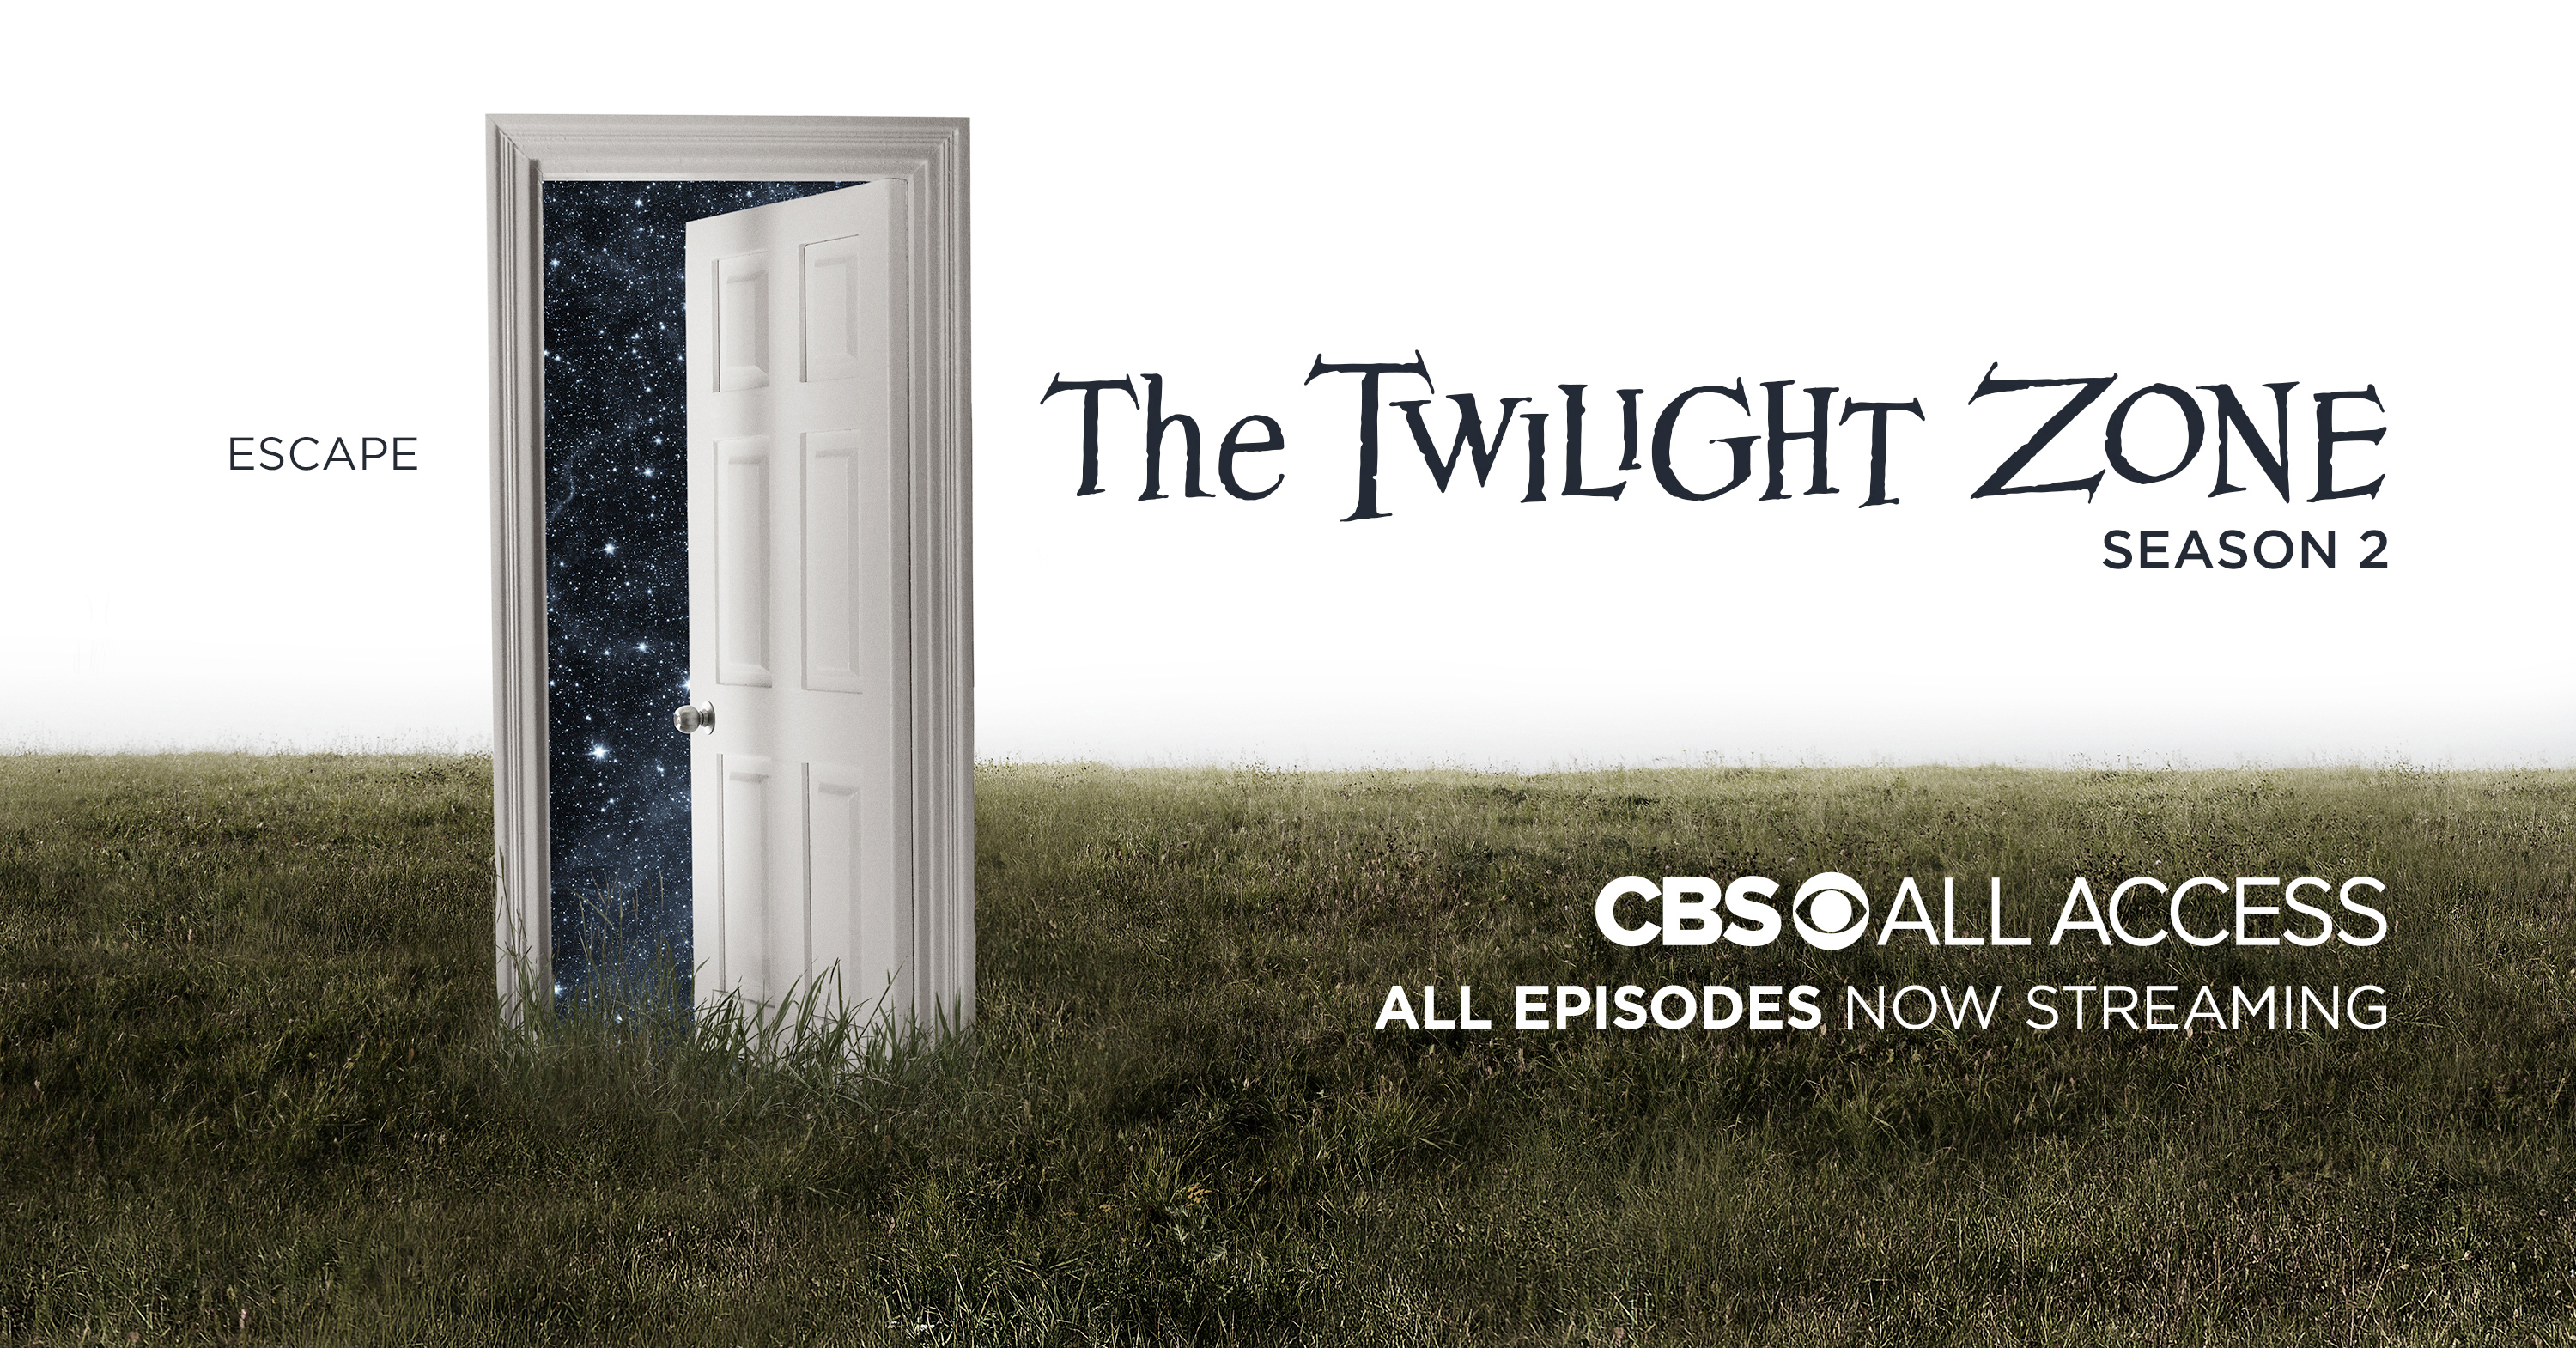 An all-star cast leads viewers into The Twilight Zone Season 2, now available on CBS All Access.